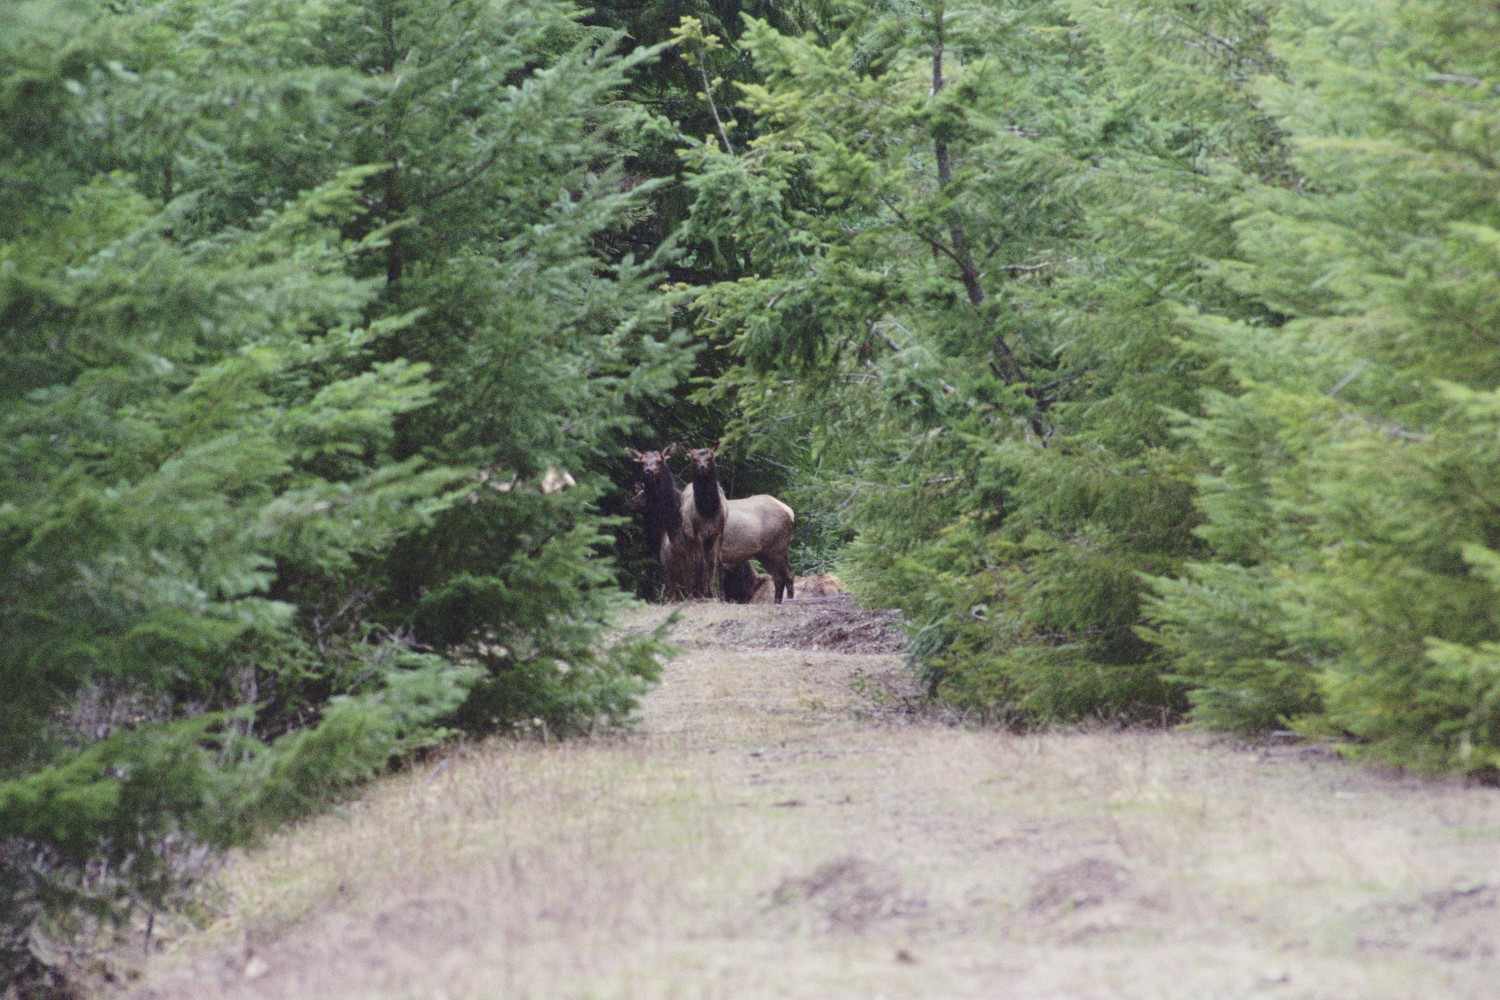 This is photo taken in the Solo Timber Sale. In the center of the photo are two elk looking at the camera through a clearing of young trees.